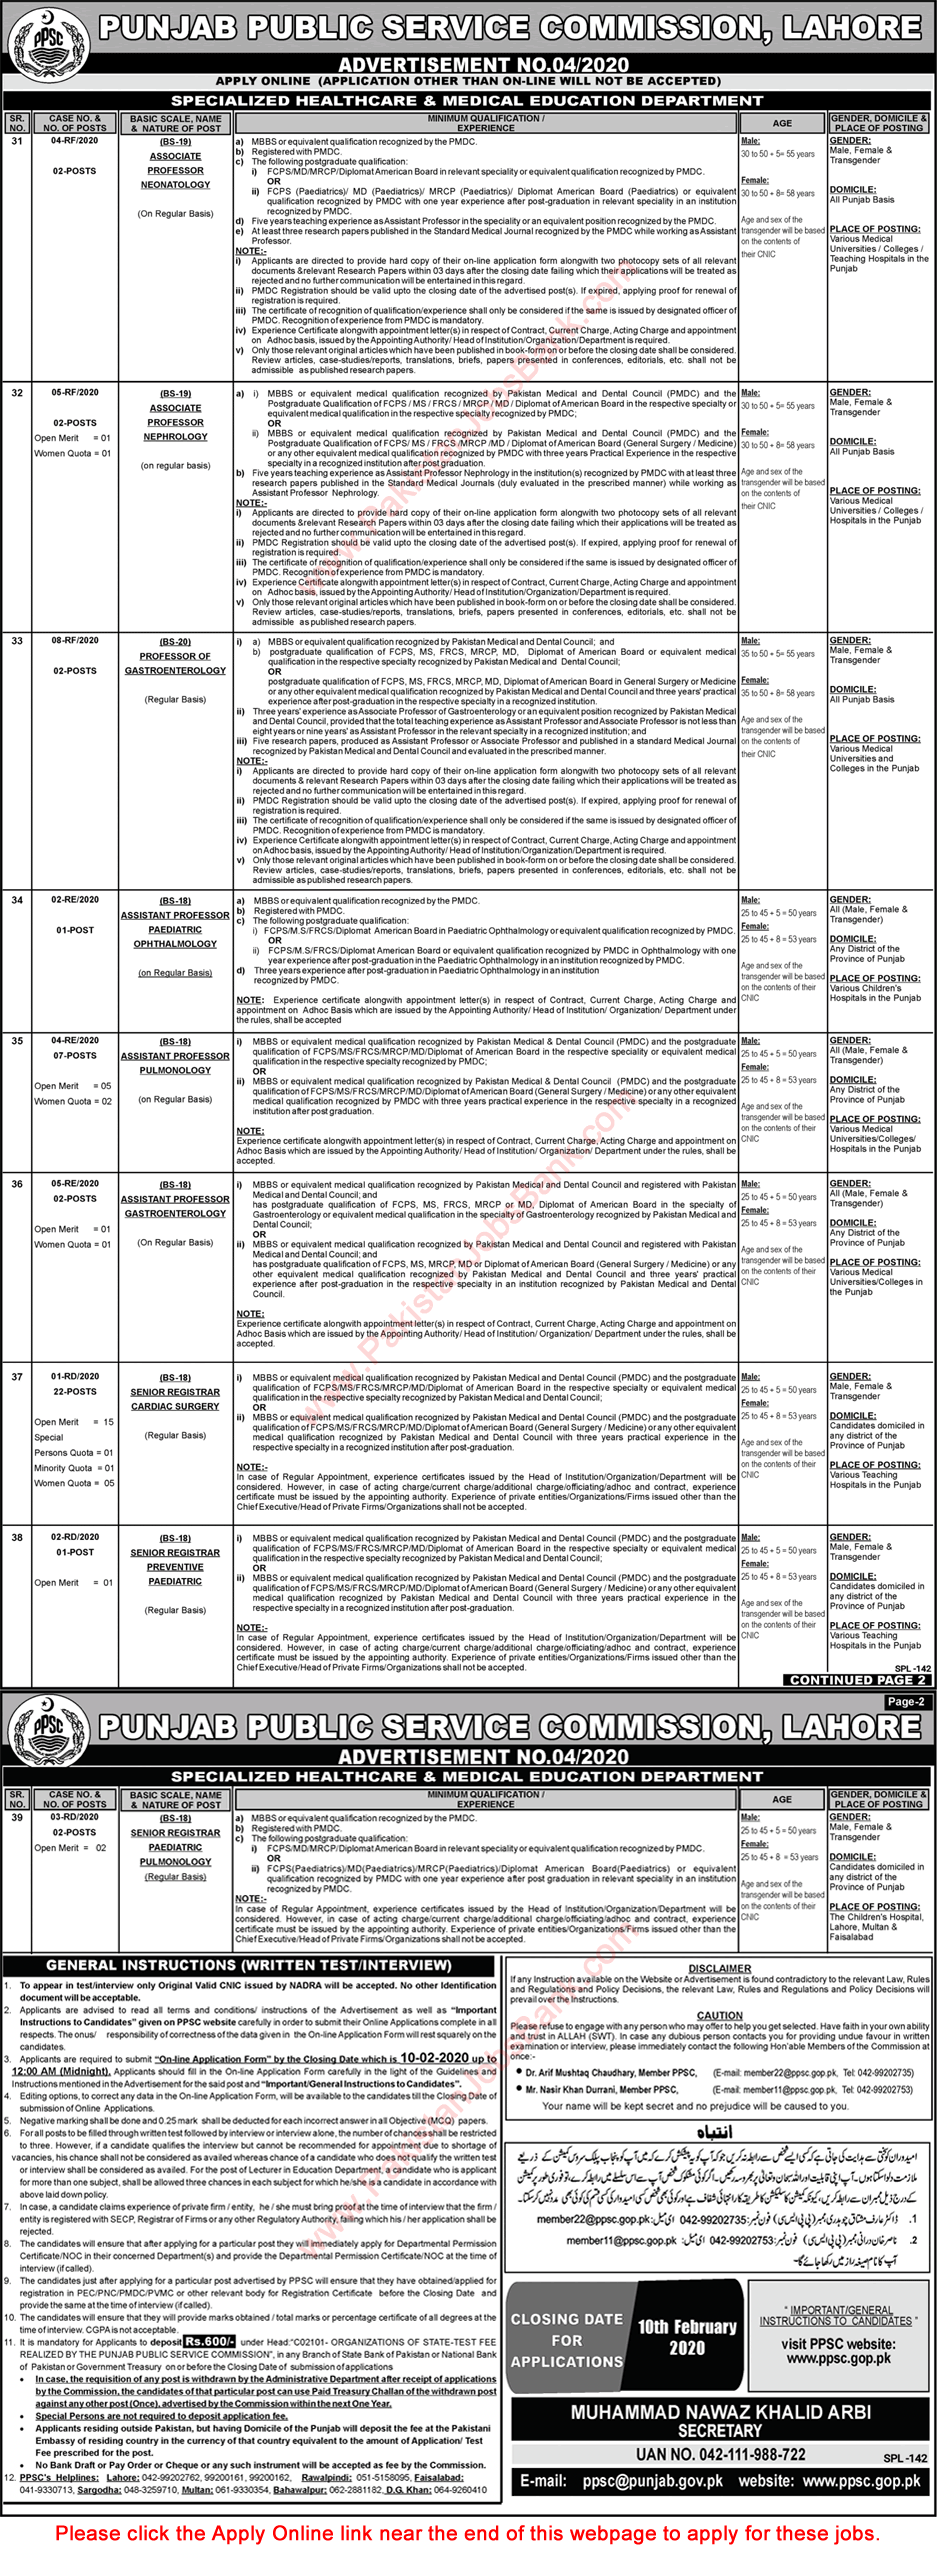 Specialized Healthcare and Medical Education Department Punjab Jobs 2020 PPSC Apply Online Teaching Faculty Latest